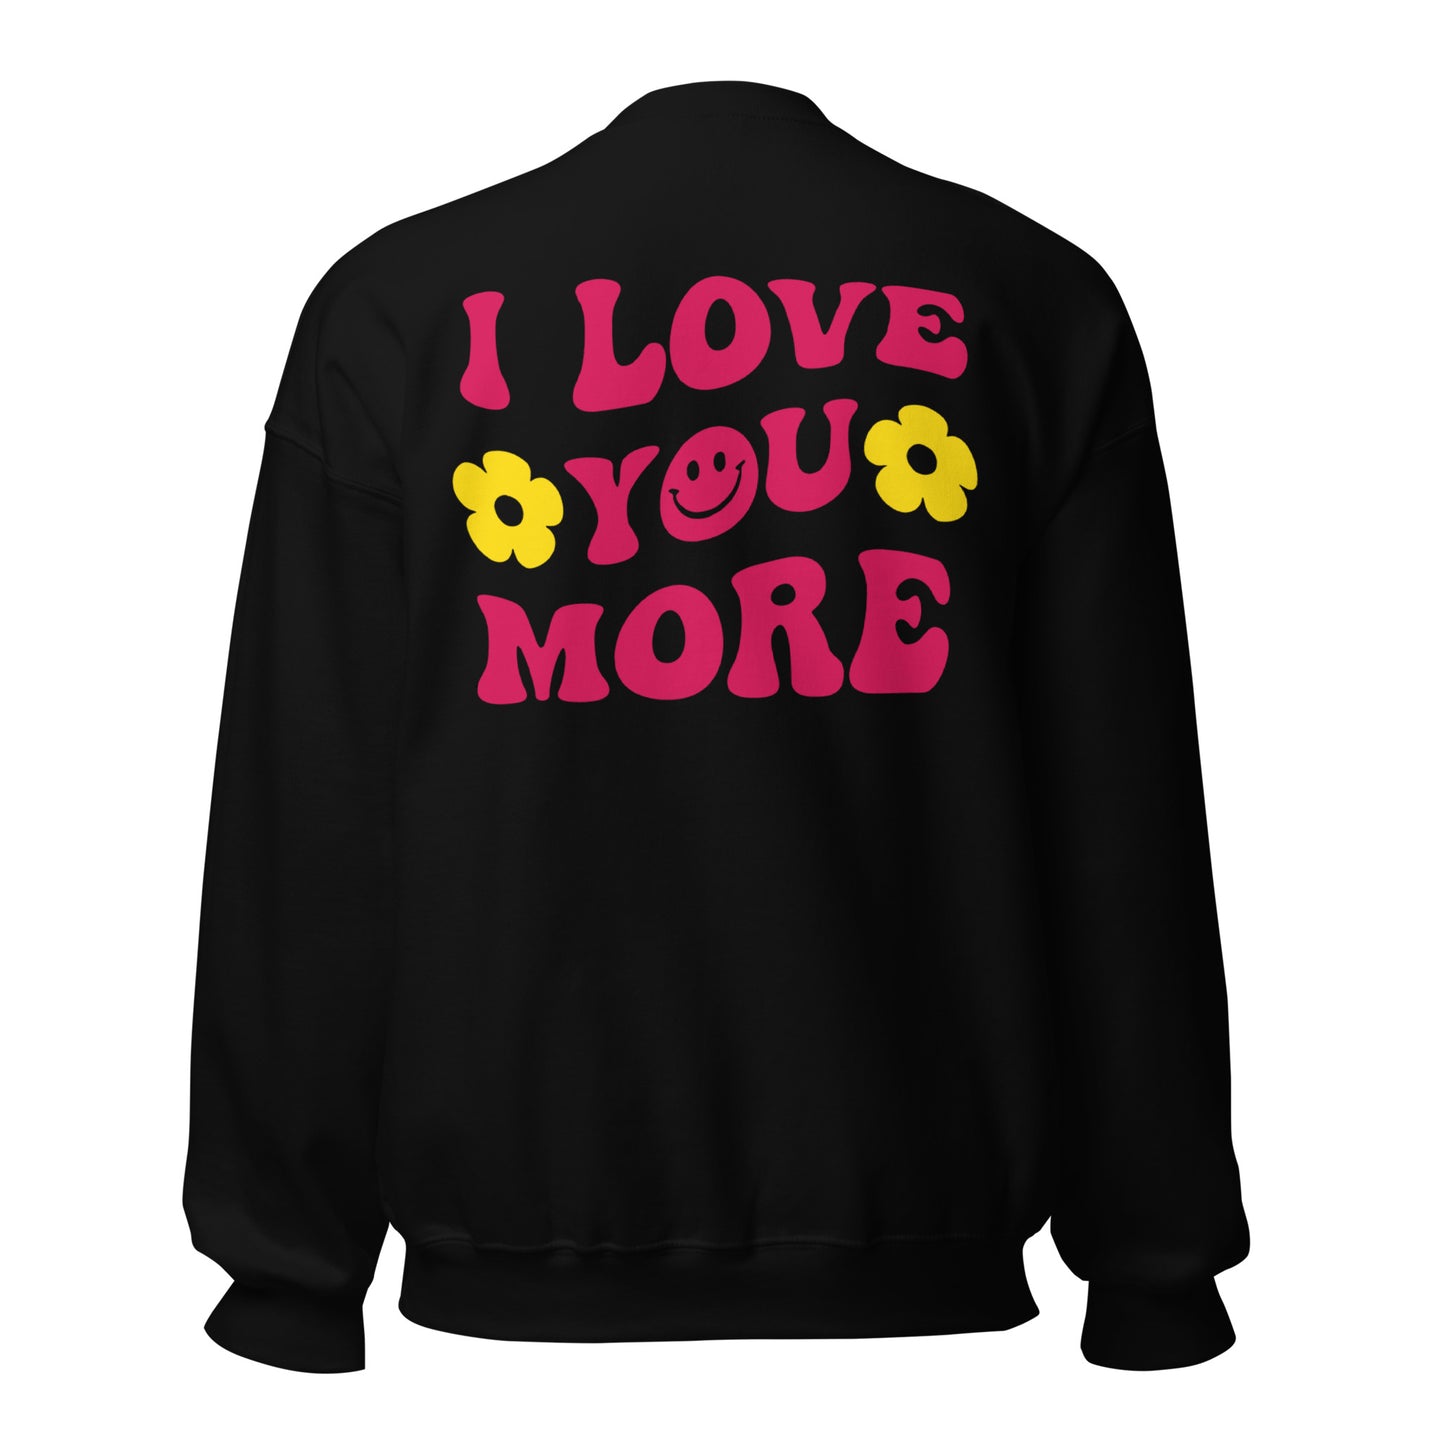 Smiley Face Black Sweatshirt, "I Love You More" on Back (Hot Pink Text, Yellow Flower)